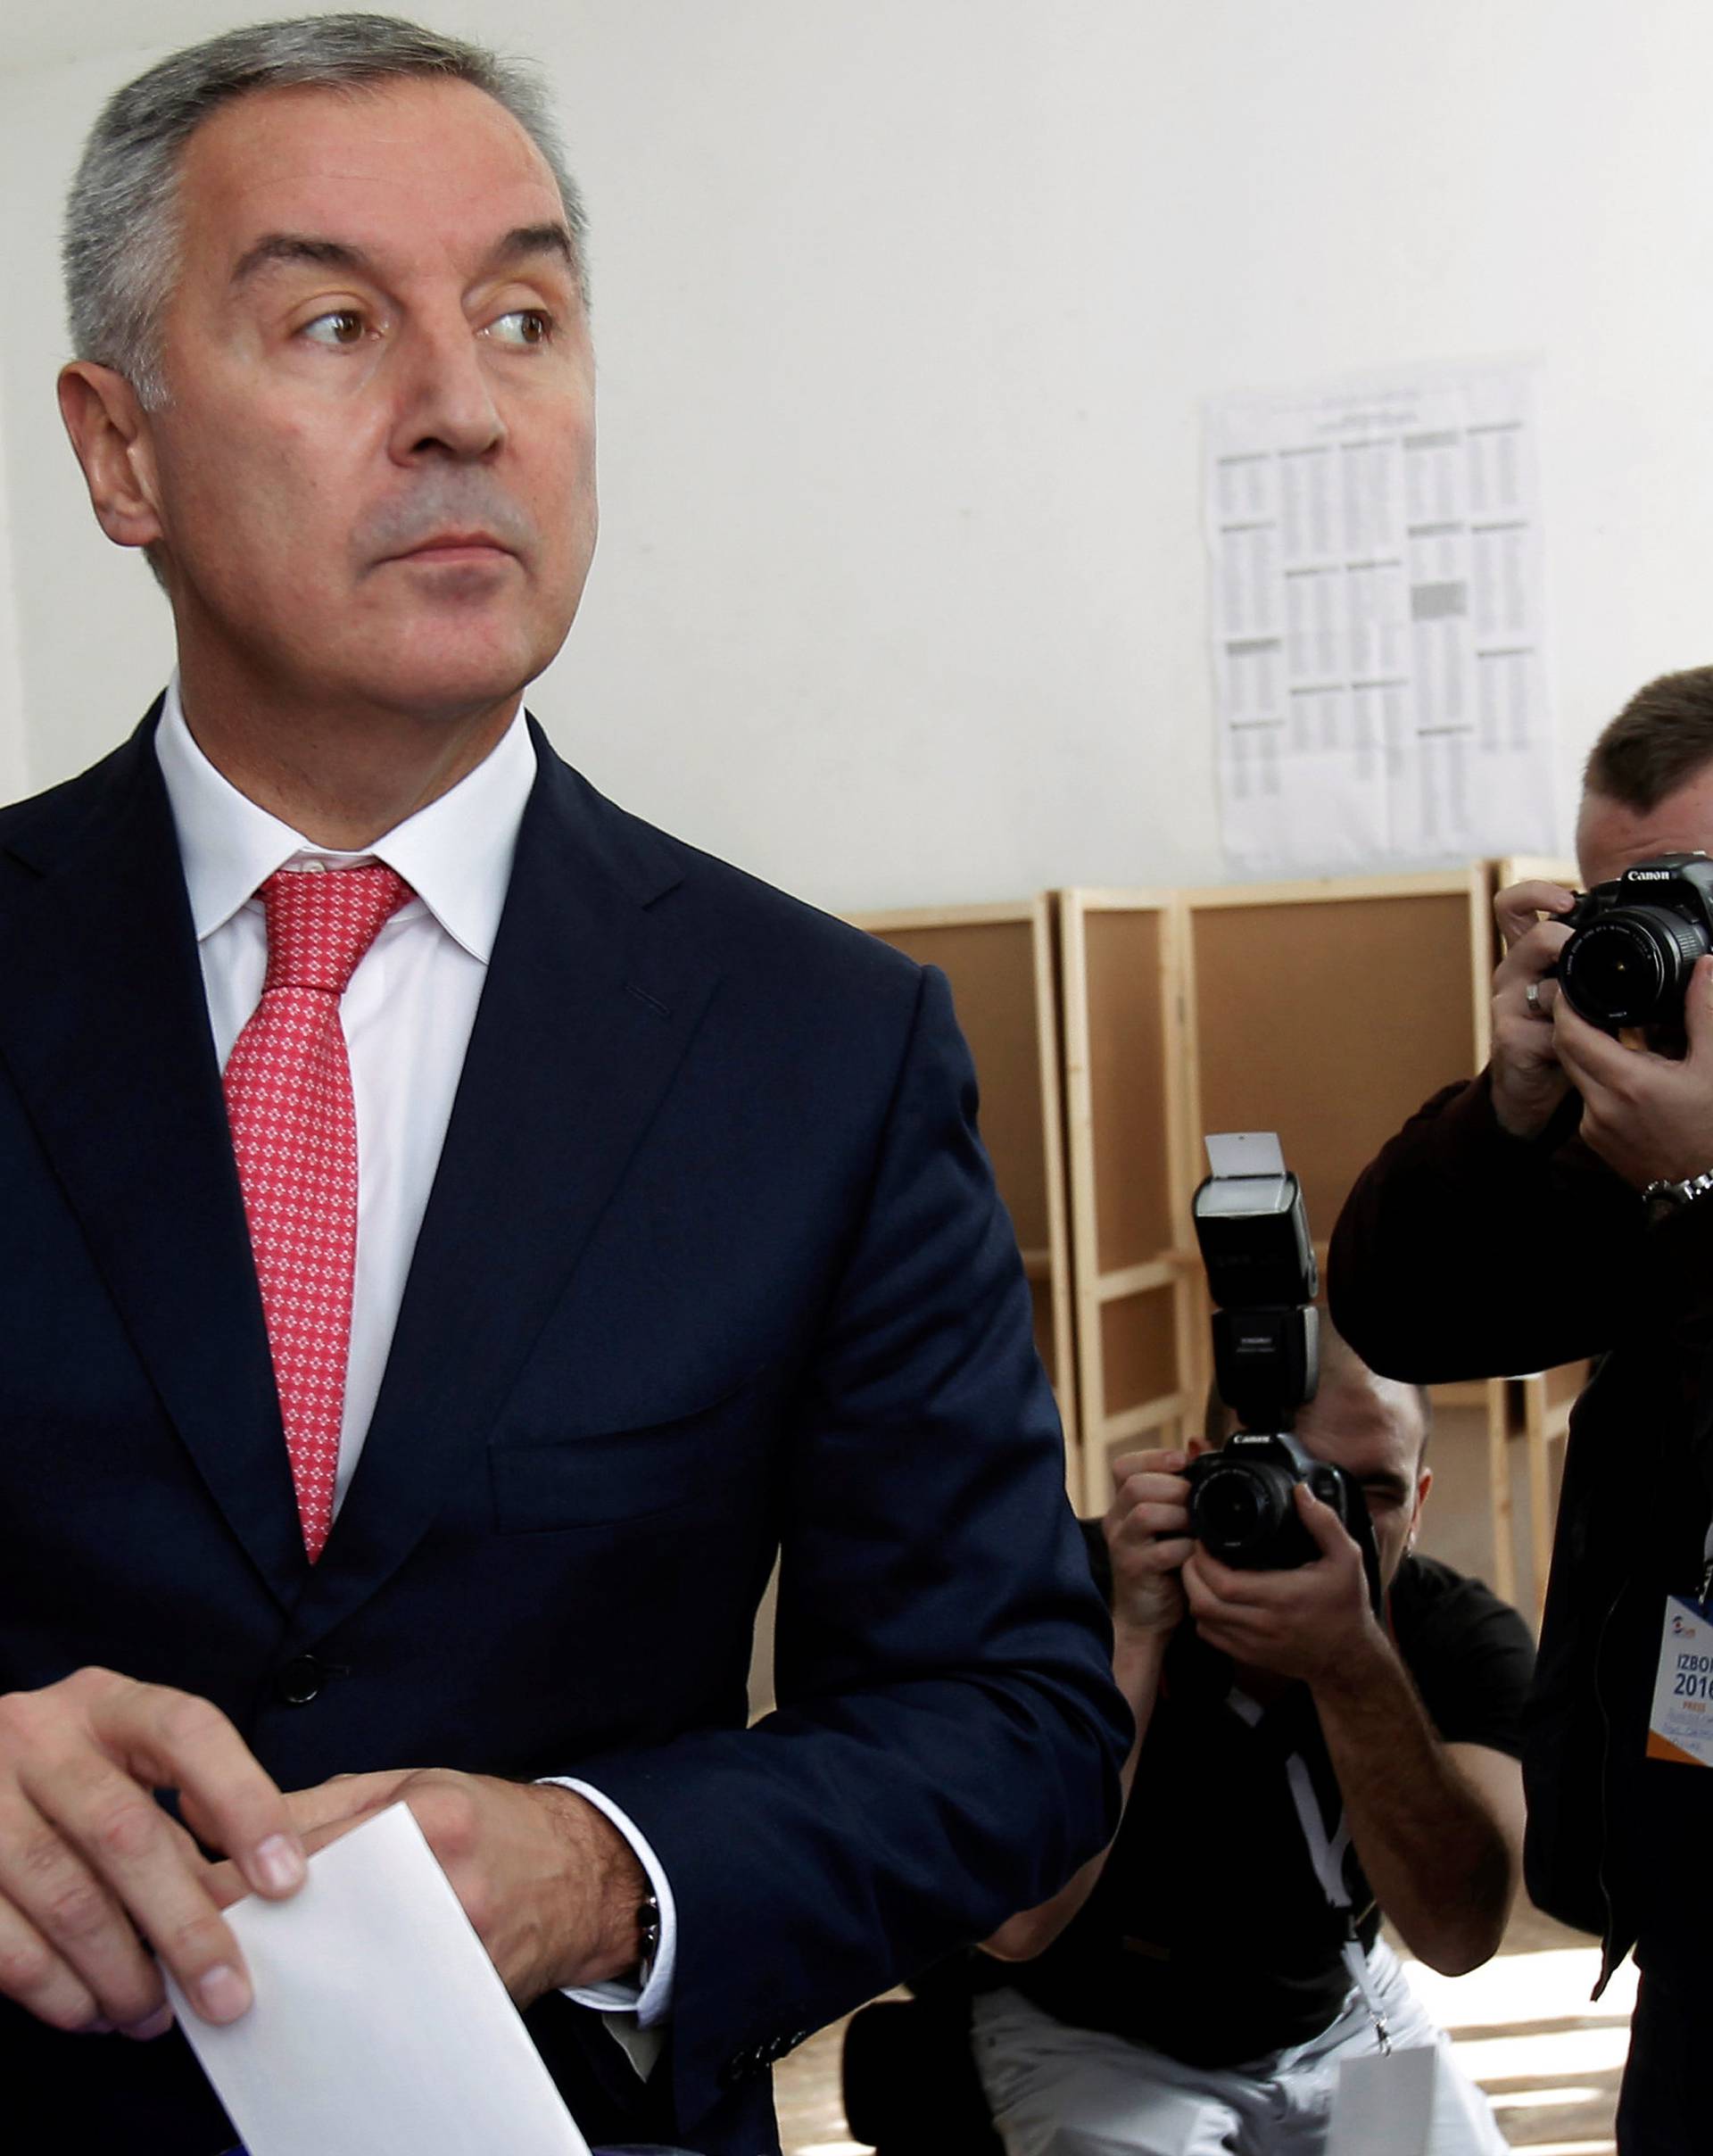 Montenegrin Prime Minister and leader of ruling Democratic Party of Socialists, Milo Djukanovic, casts his ballot at a polling station in Podgorica